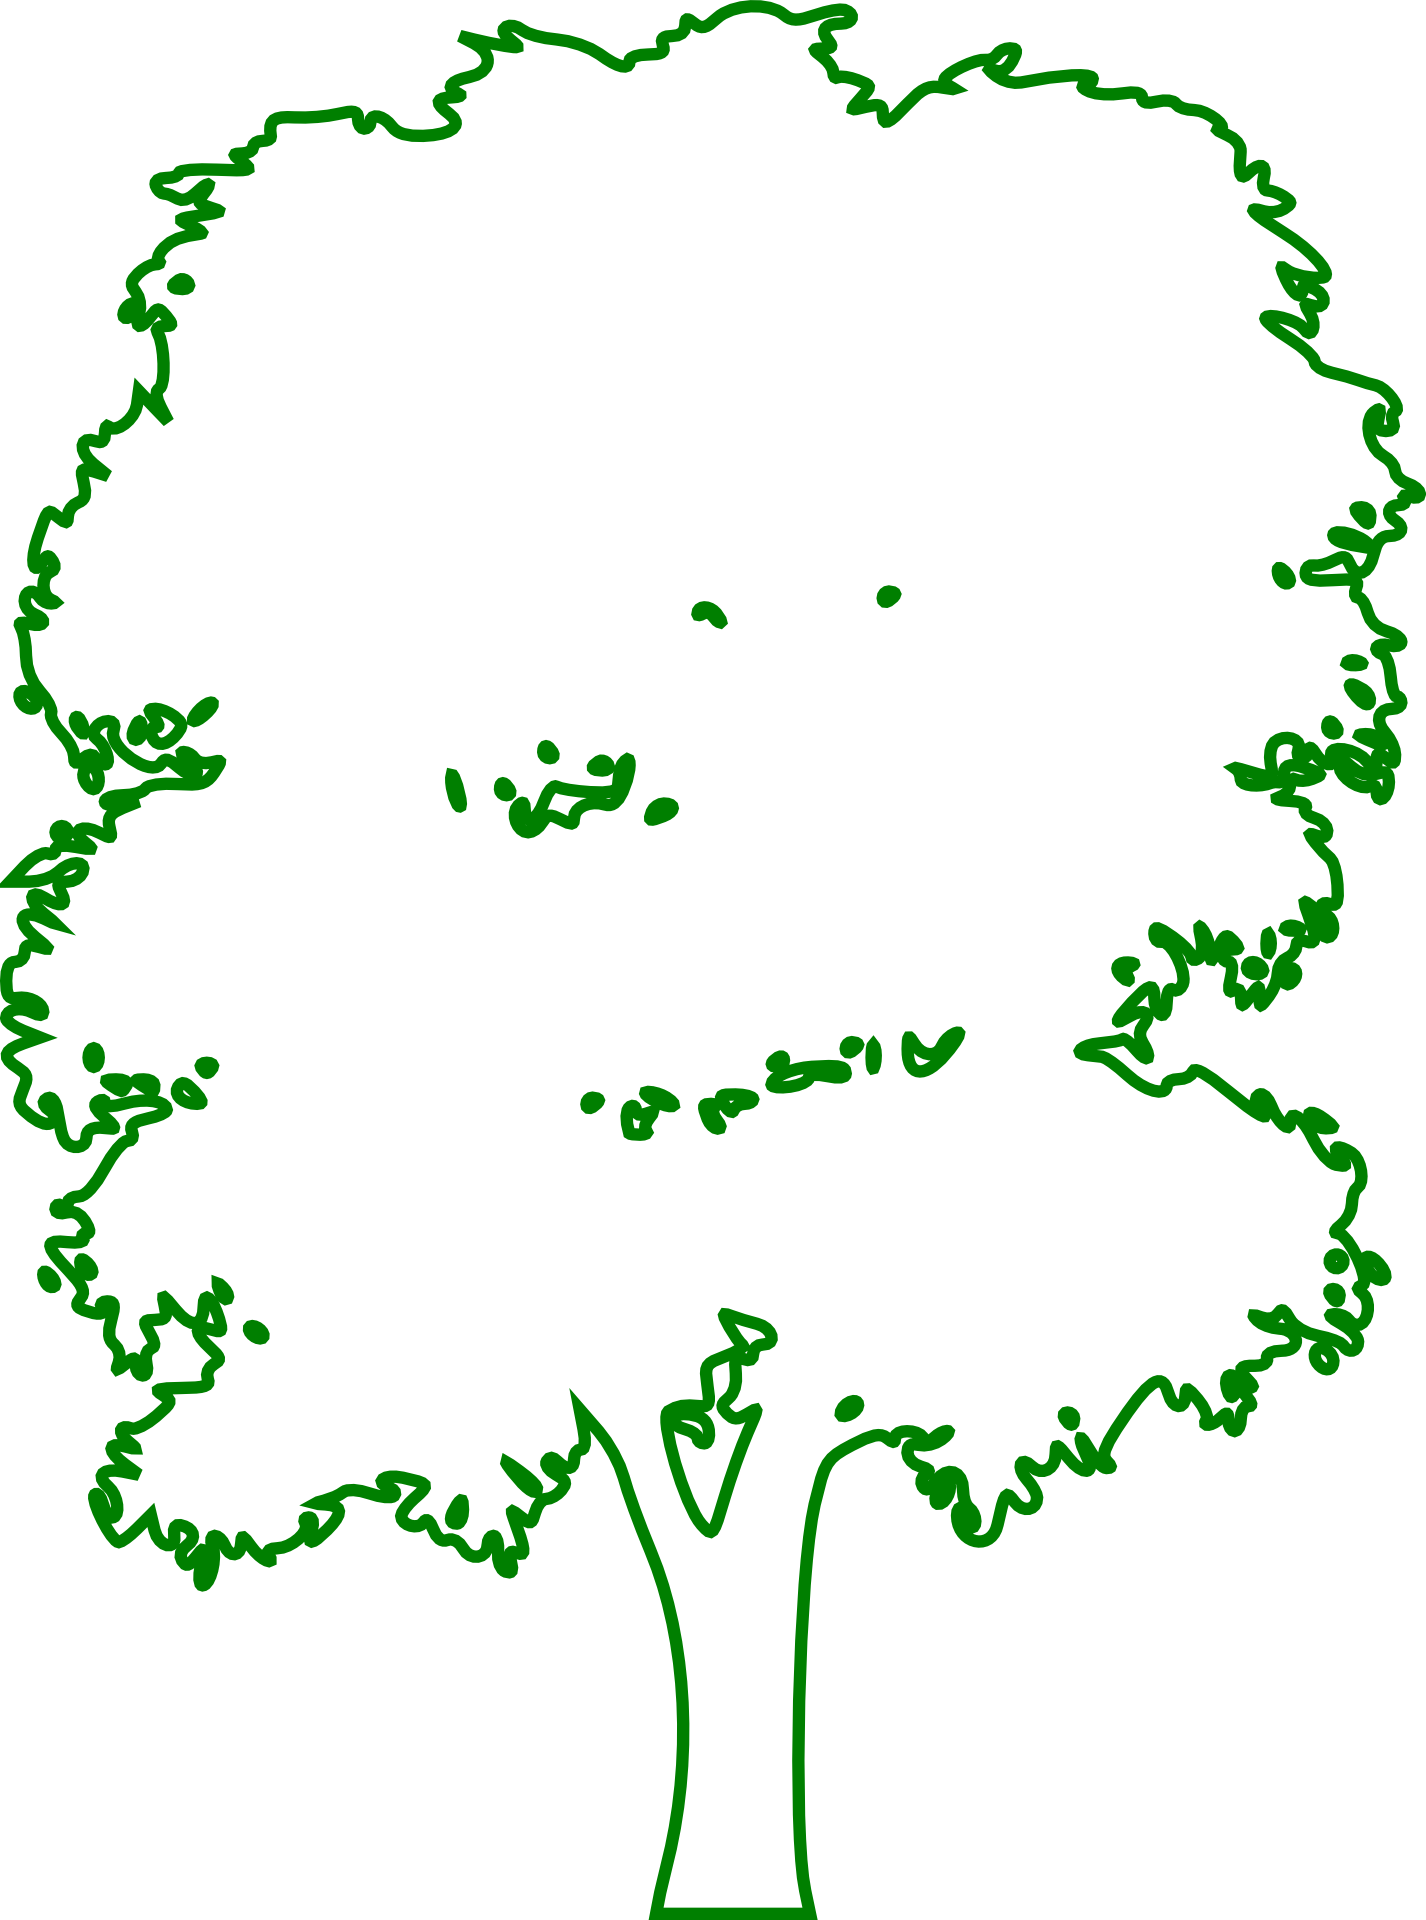 Green Outline Drawing Of A Tree - Protect Our Environment 1080p Png (1426x1920)